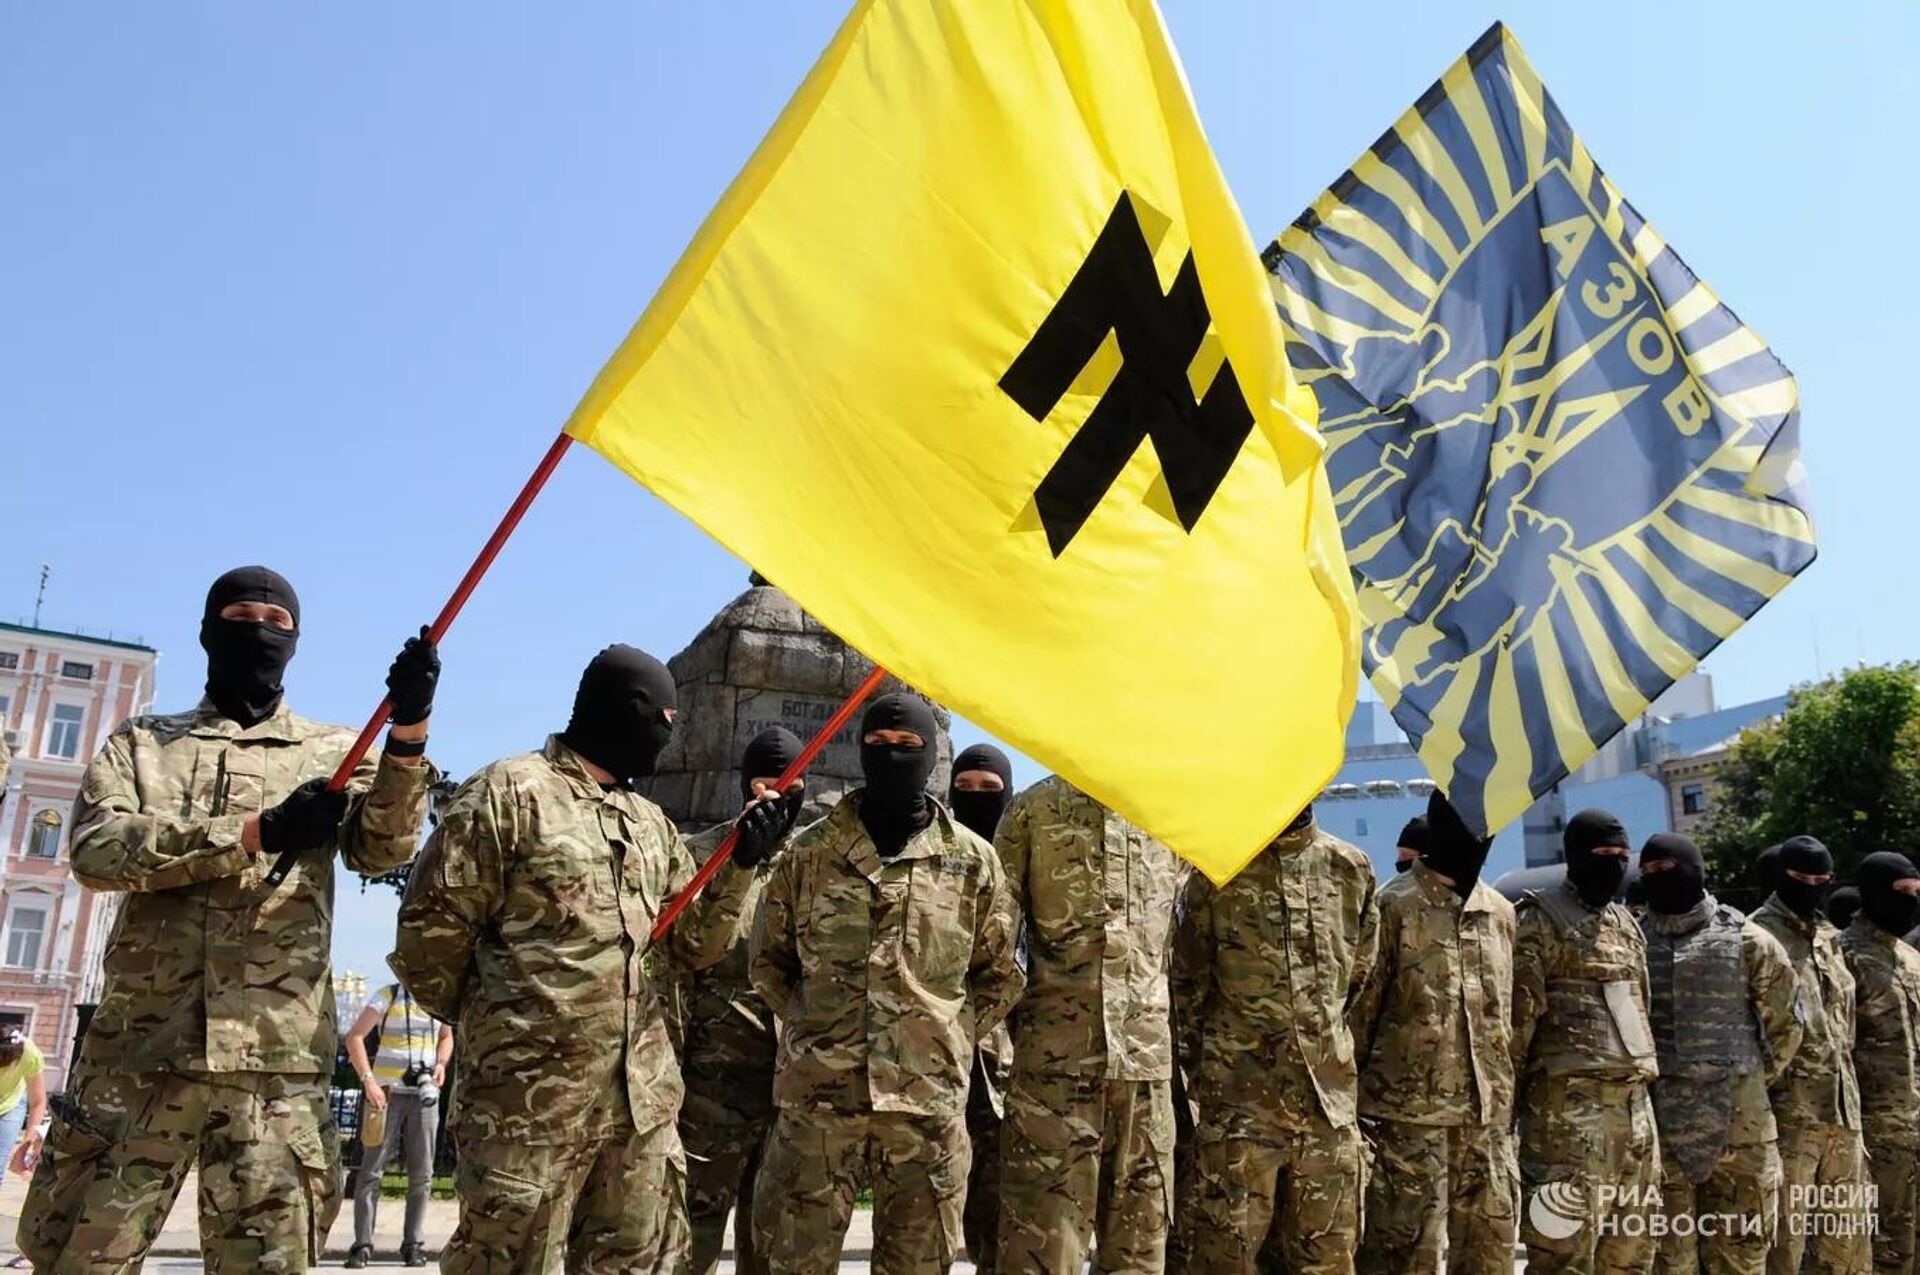 Fighters of the neo-Nazi Azov Battalion take the oath of allegiance to Ukraine in Sophia Square in Kiev before being sent to Donbass. Members of the Nazi battalion have committed hundreds of war crimes against the population of Donbass over eight years. The Azov flag has an inverted image of the runic symbol “Wolfsangel”, which was used by the Nazis. - Sputnik International, 1920, 22.05.2022